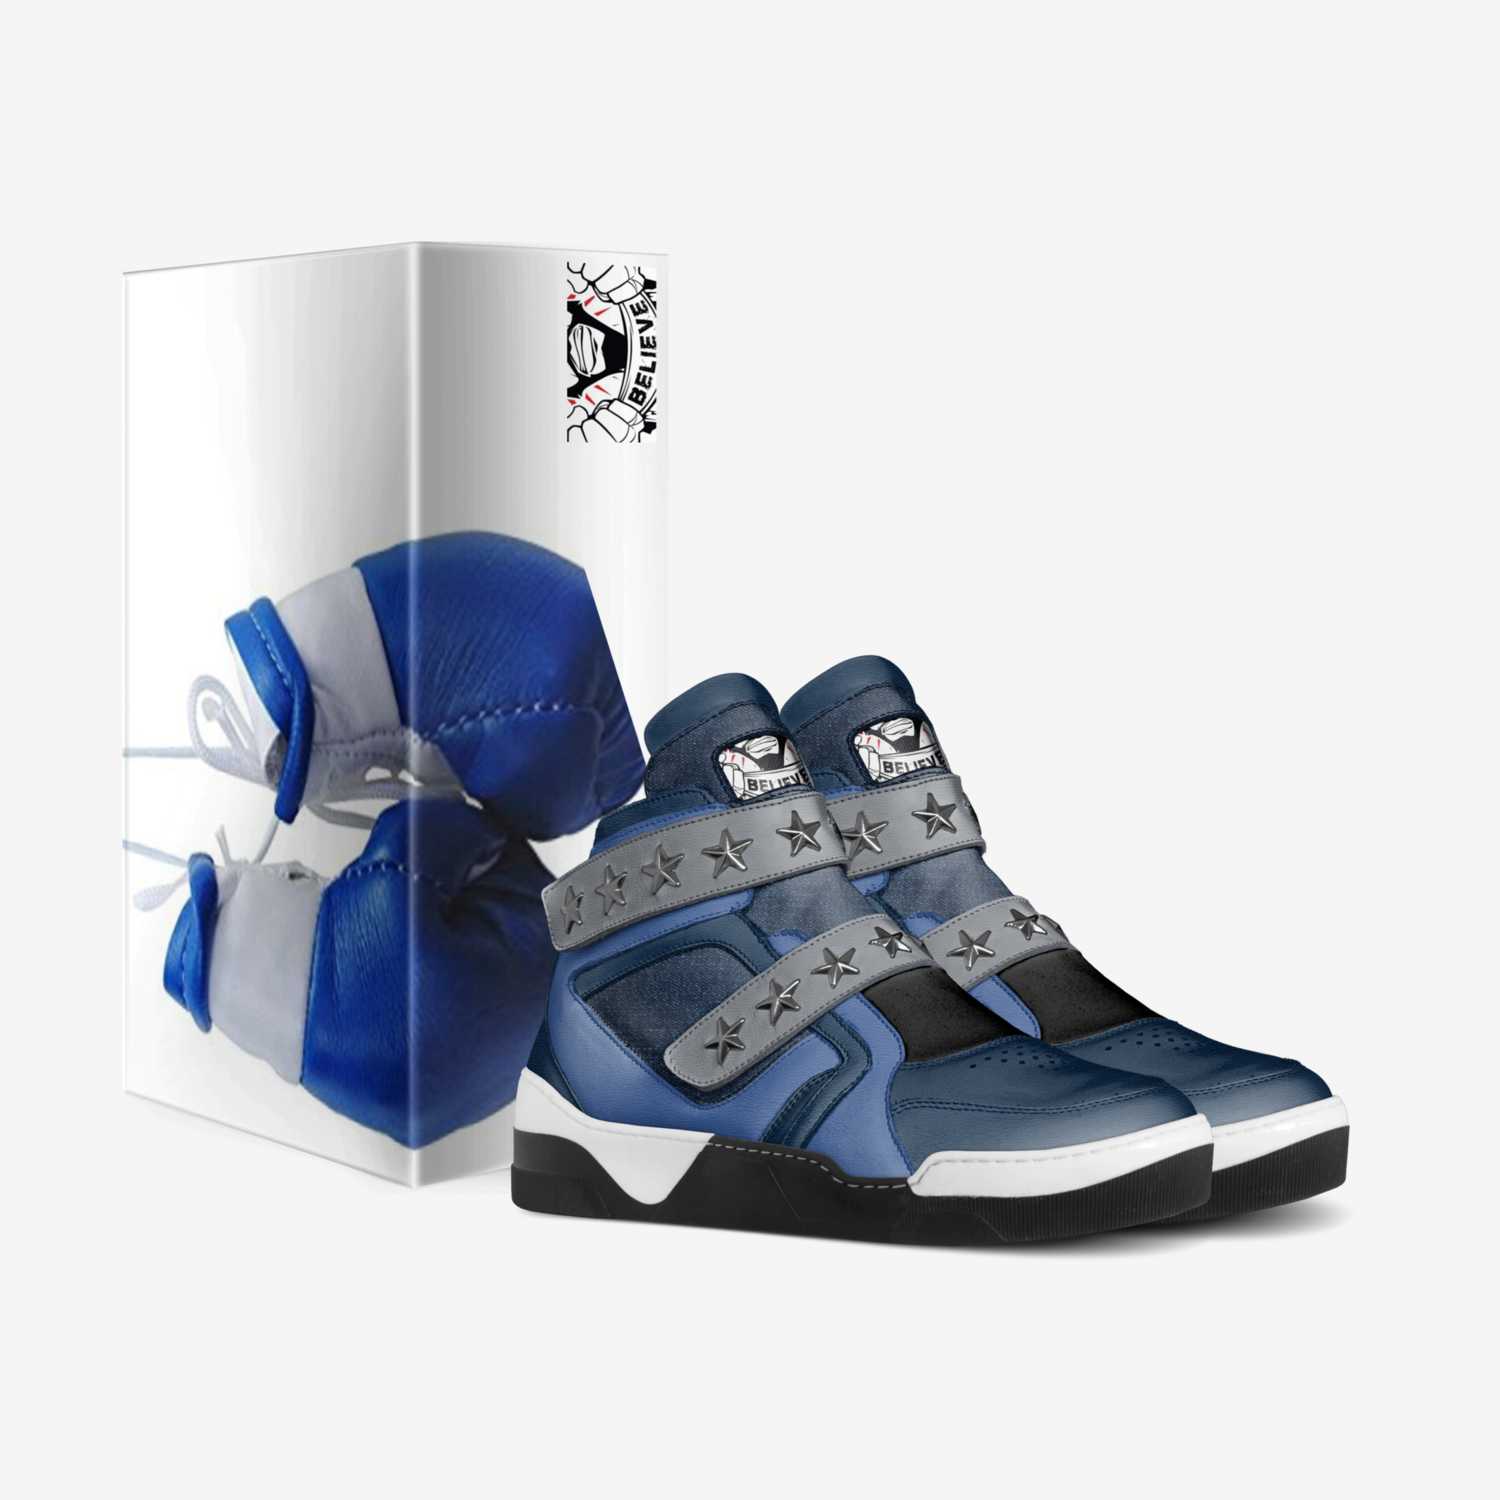 THE BLUE CORNER custom made in Italy shoes by Luther Smith | Box view